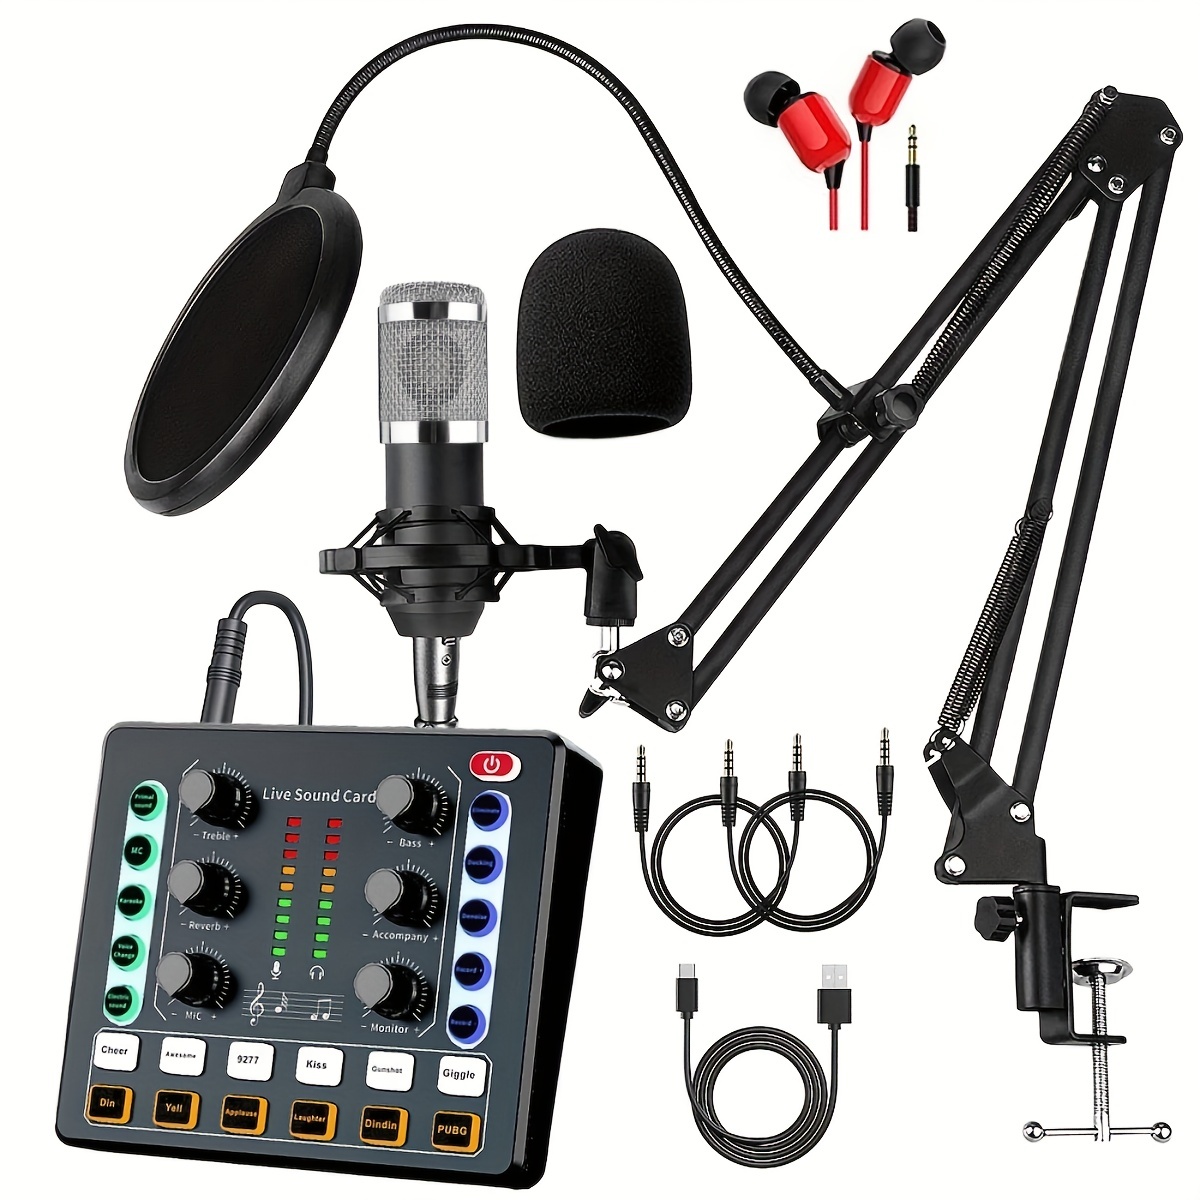 

Podcast Equipment Bundle, Audio Interface With All In 1 Live Sound Card And Bm800 , Podcast Microphone, Perfect For Recording, Broadcasting, Live Streaming Eid Al-adha Mubarak